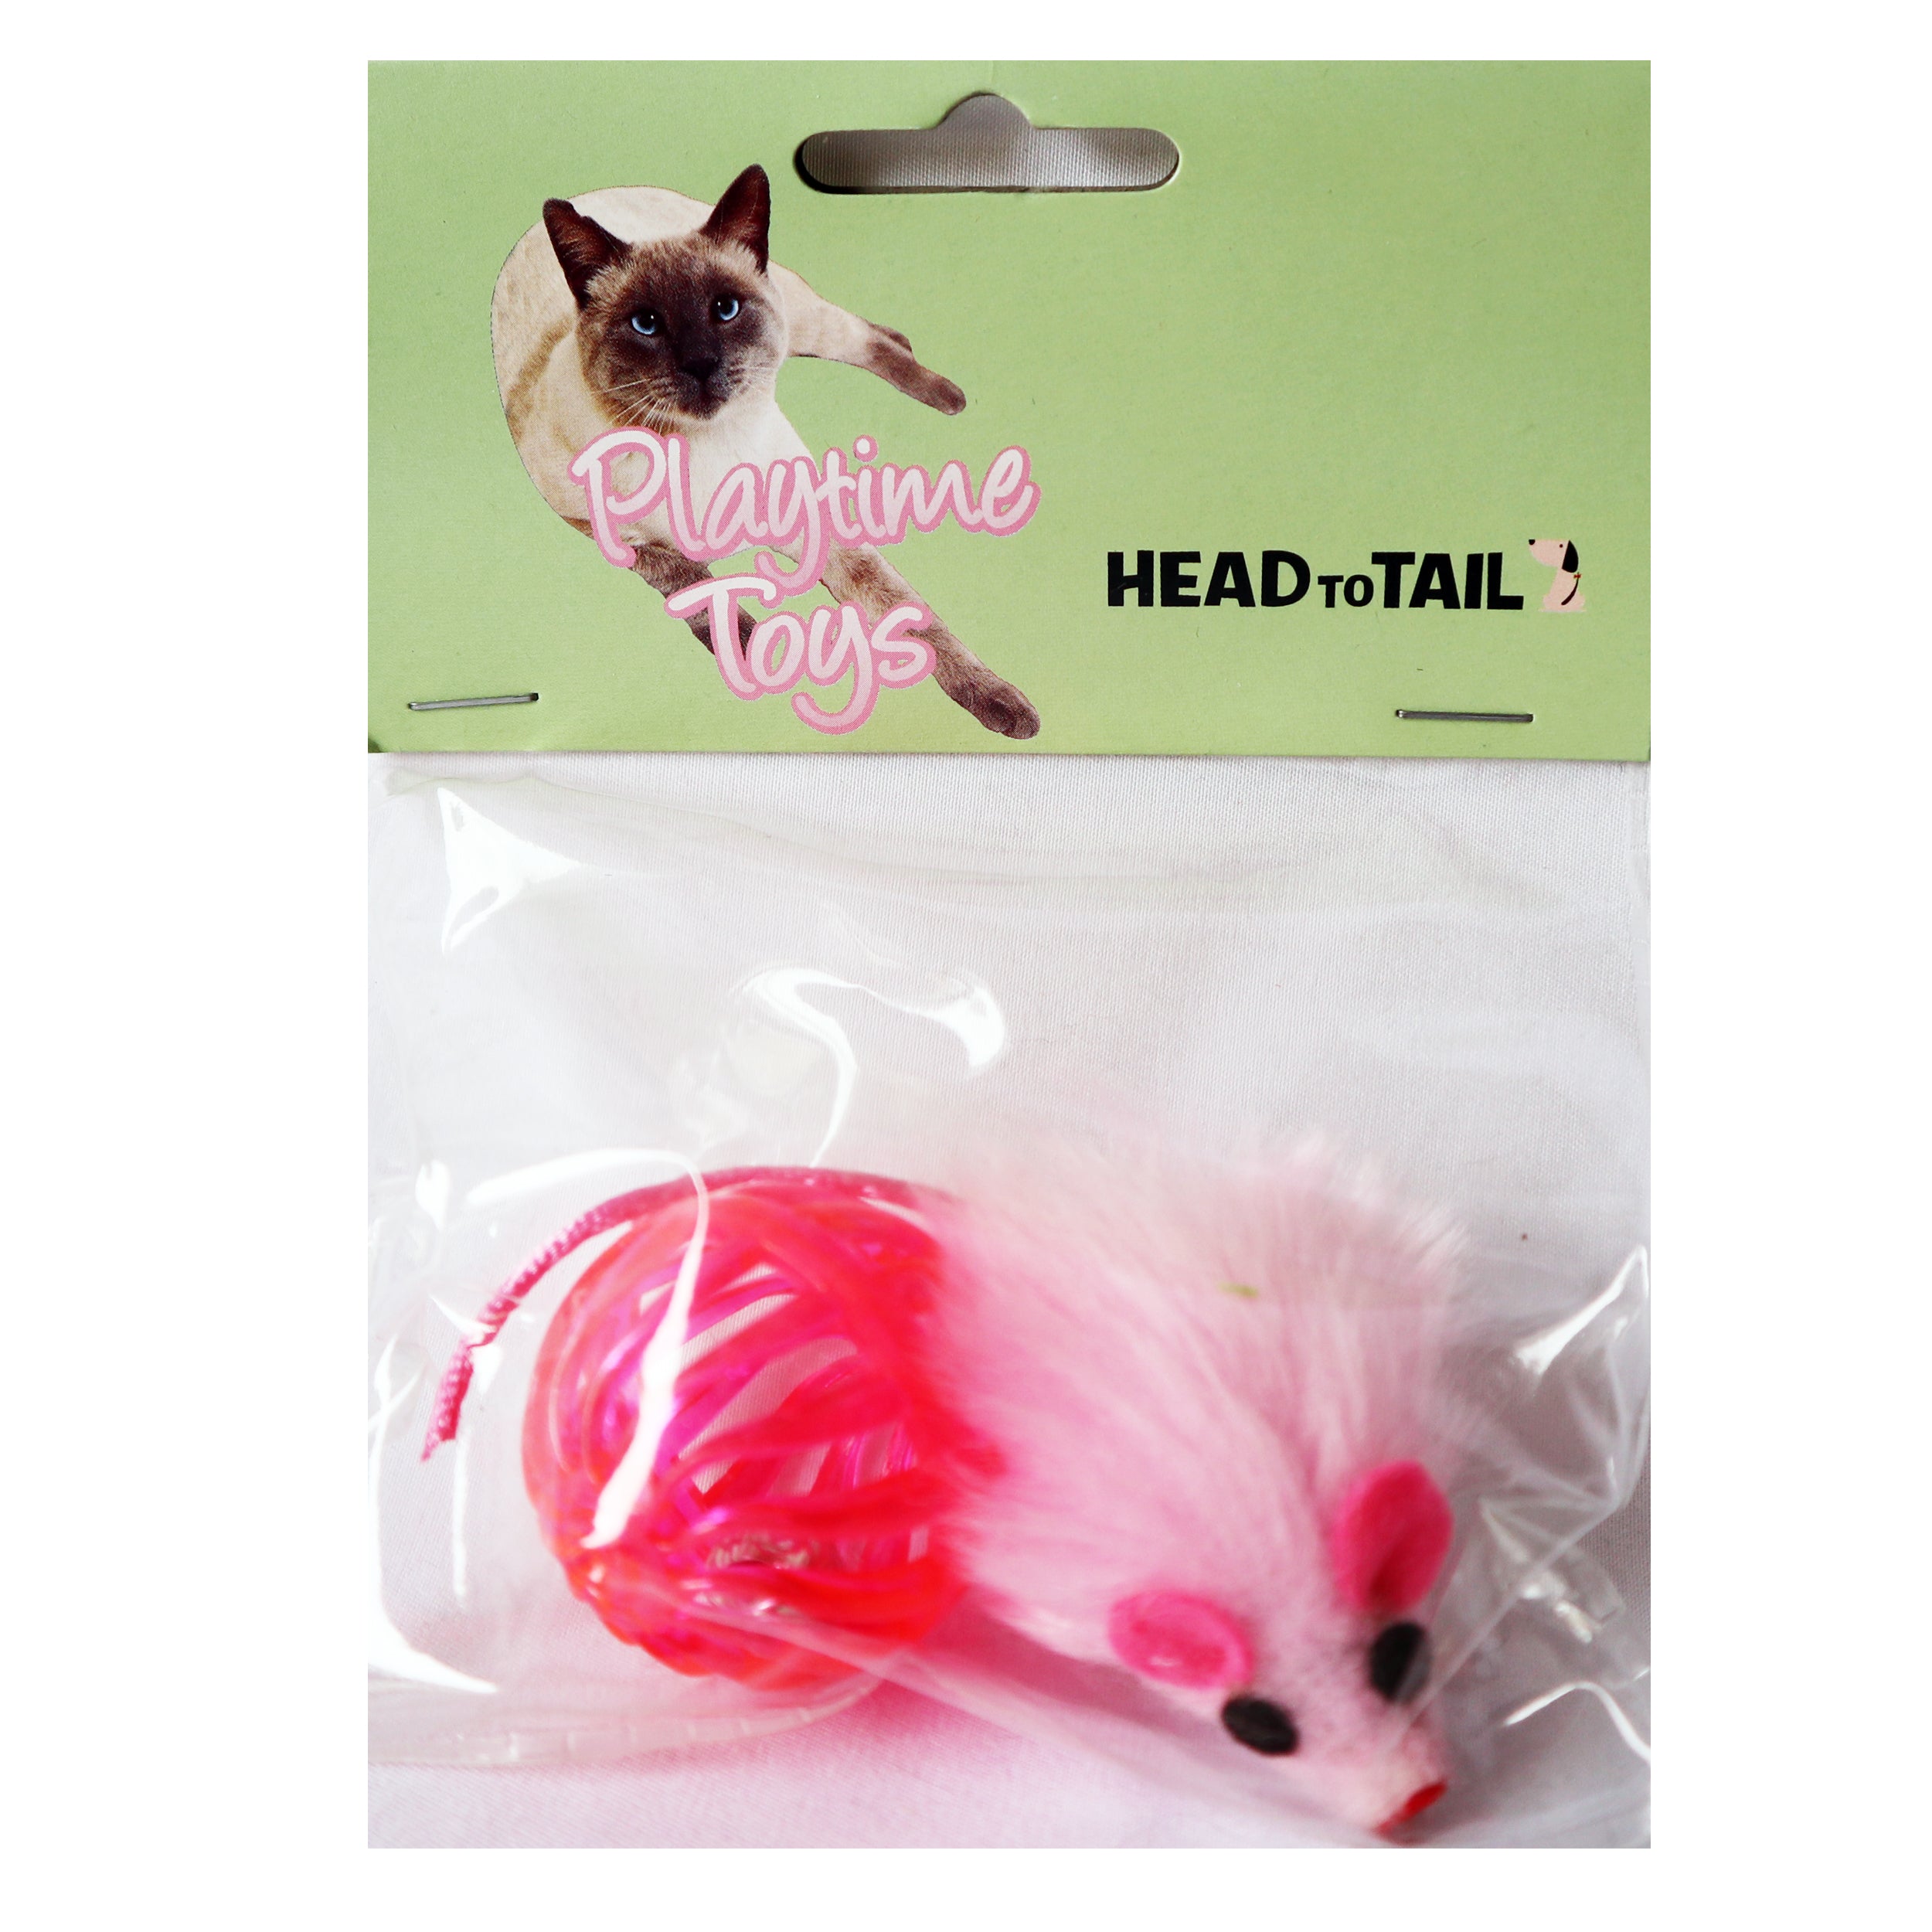 Pink Multitextured Ball Ball with one Furry Pink mouse with String Tail 2 piece one pack cat toy for cats and kittens fun exciting toy